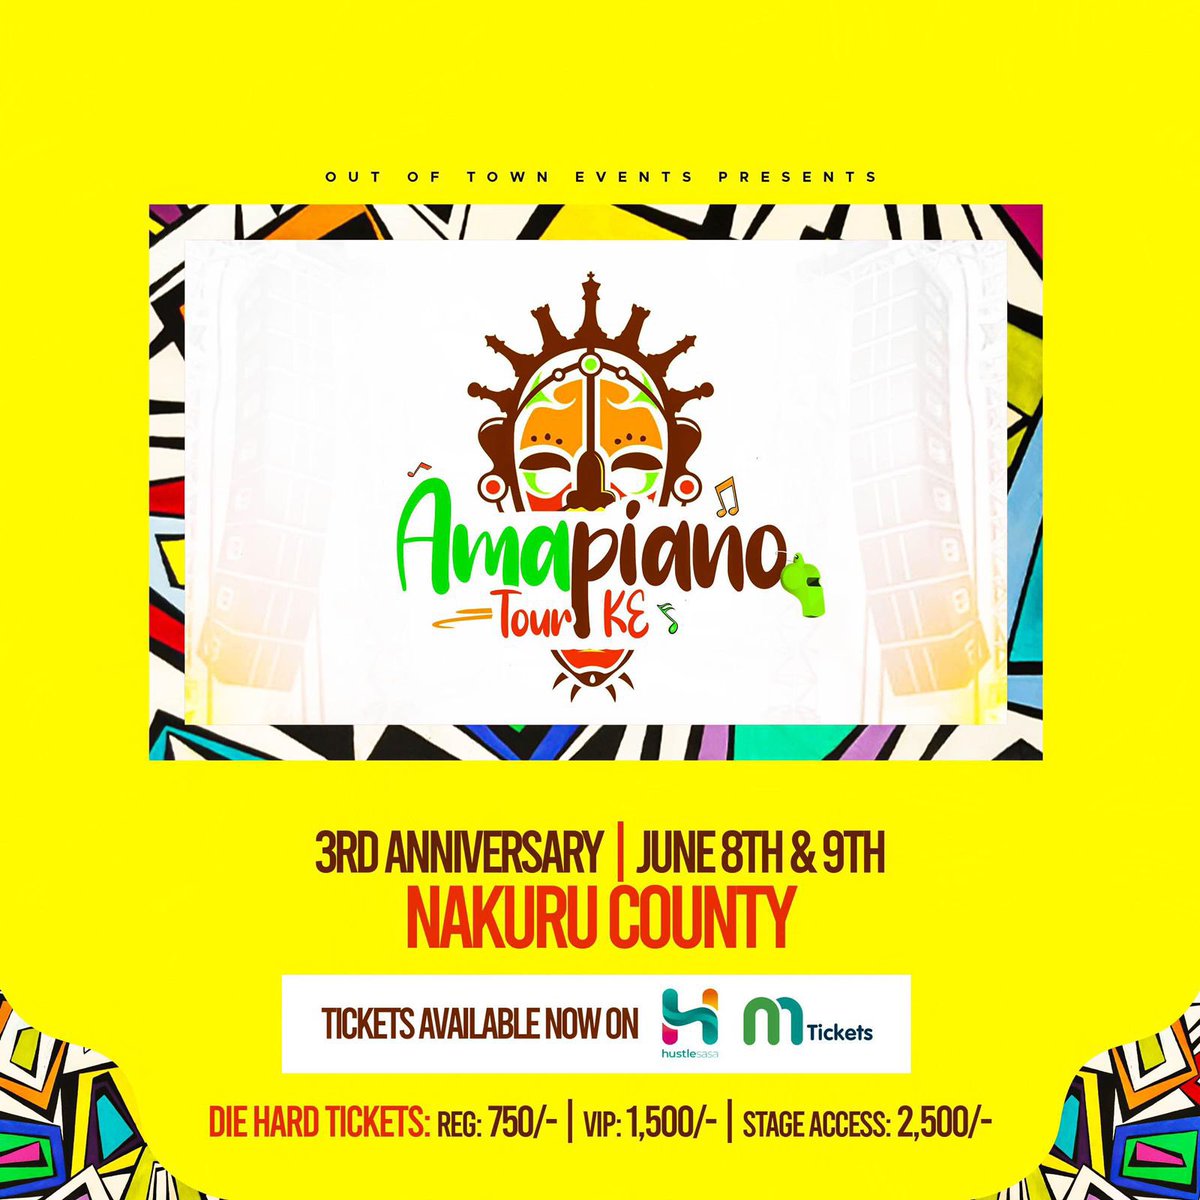 AMAPIANO TOUR 3rd Anniversary on 8th and 9th June in Nakuru Military Police Game Of Thrones BREAKING NEWS Nyakundi Orwa Ojode Sifuna Conspiracy Francis Ogolla Rest in Power Kovacic State House Tonje Helicopter Buy Tickets at 750 Bob Tickets link 👇👇 events.mtickets.com/events/amapian…